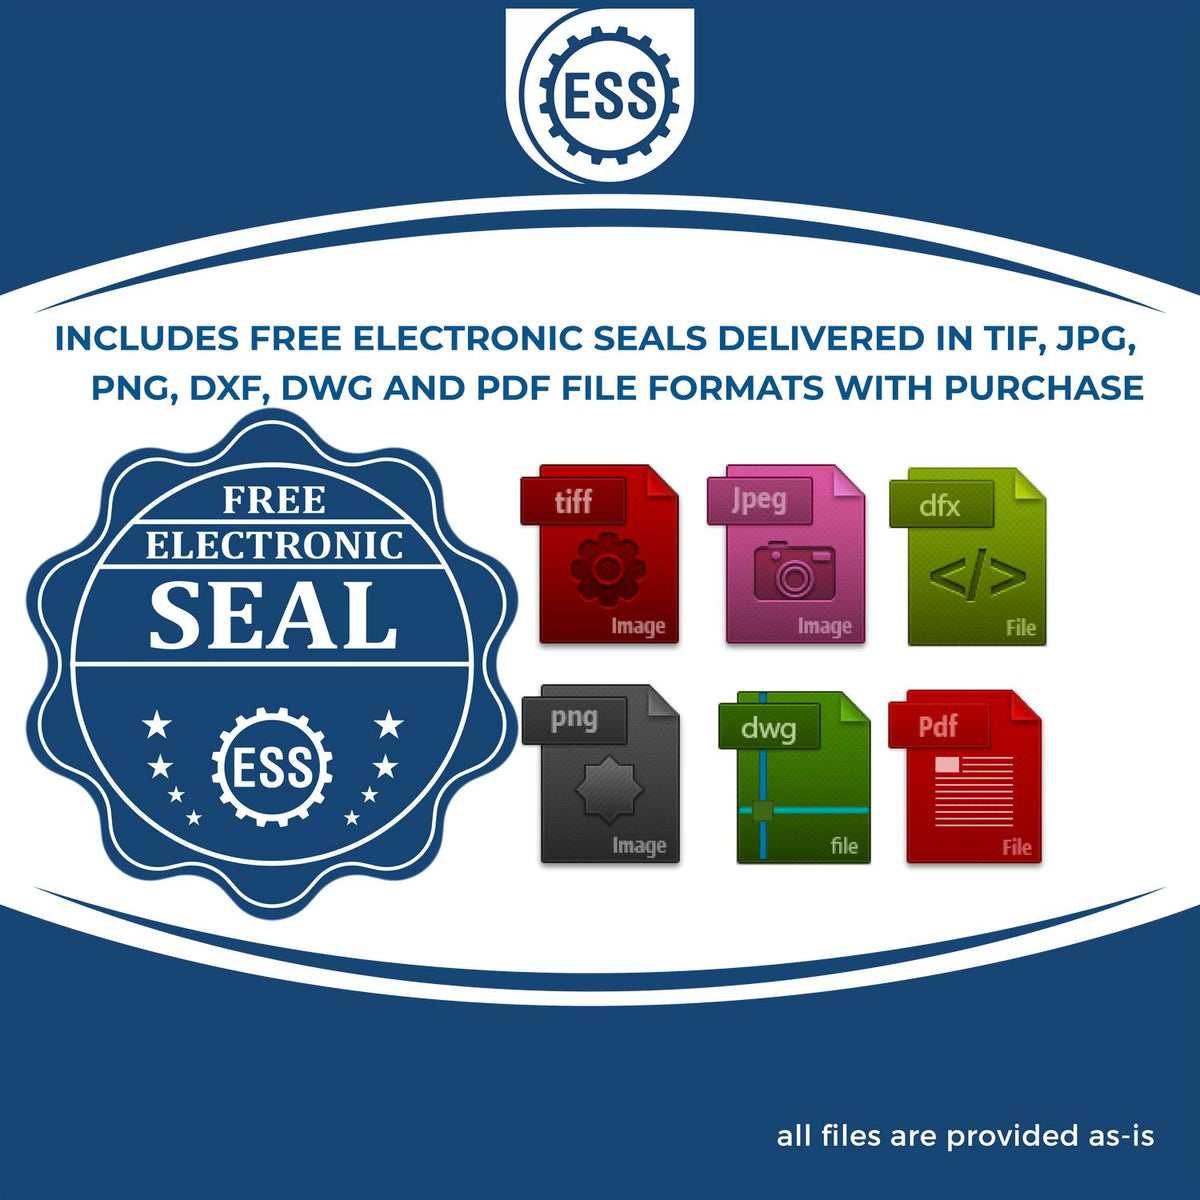 An infographic for the free electronic seal for the Self-Inking District of Columbia Landscape Architect Stamp illustrating the different file type icons such as DXF, DWG, TIF, JPG and PNG.